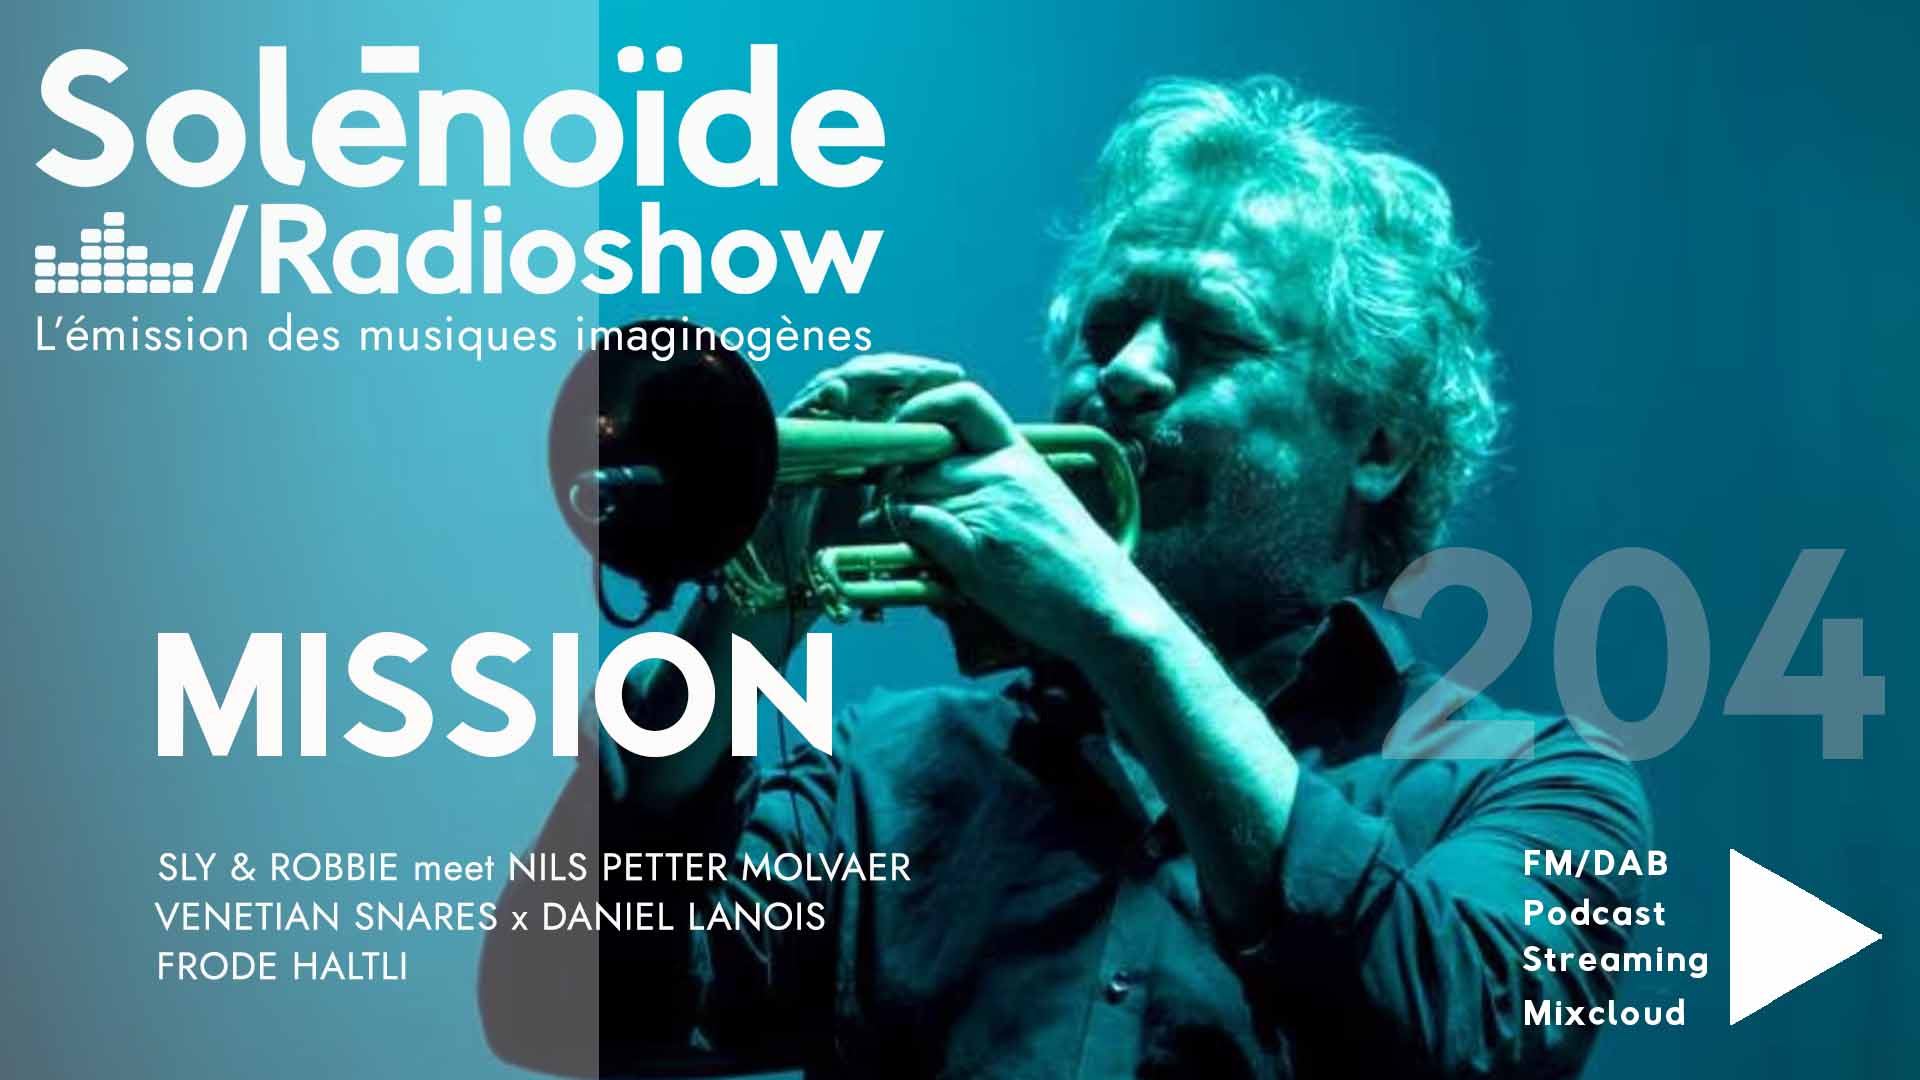 Emission > Solénoïde - Mission 204 > Sly and Robbie meet Nils Petter Molvaer...